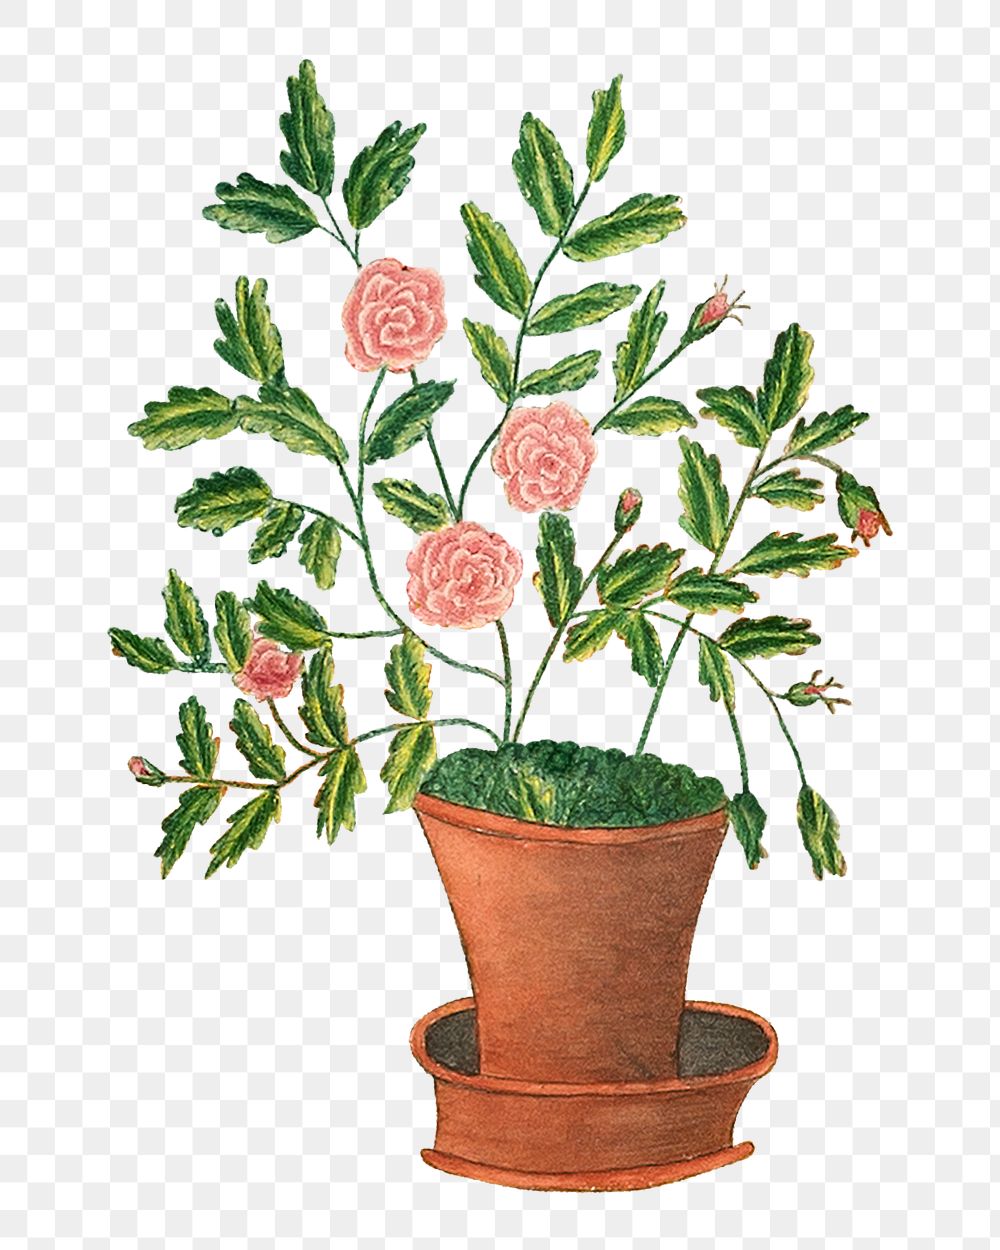 PNG Potted rose flower, vintage botanical illustration by Sarah P. Wells, transparent background. Remixed by rawpixel.